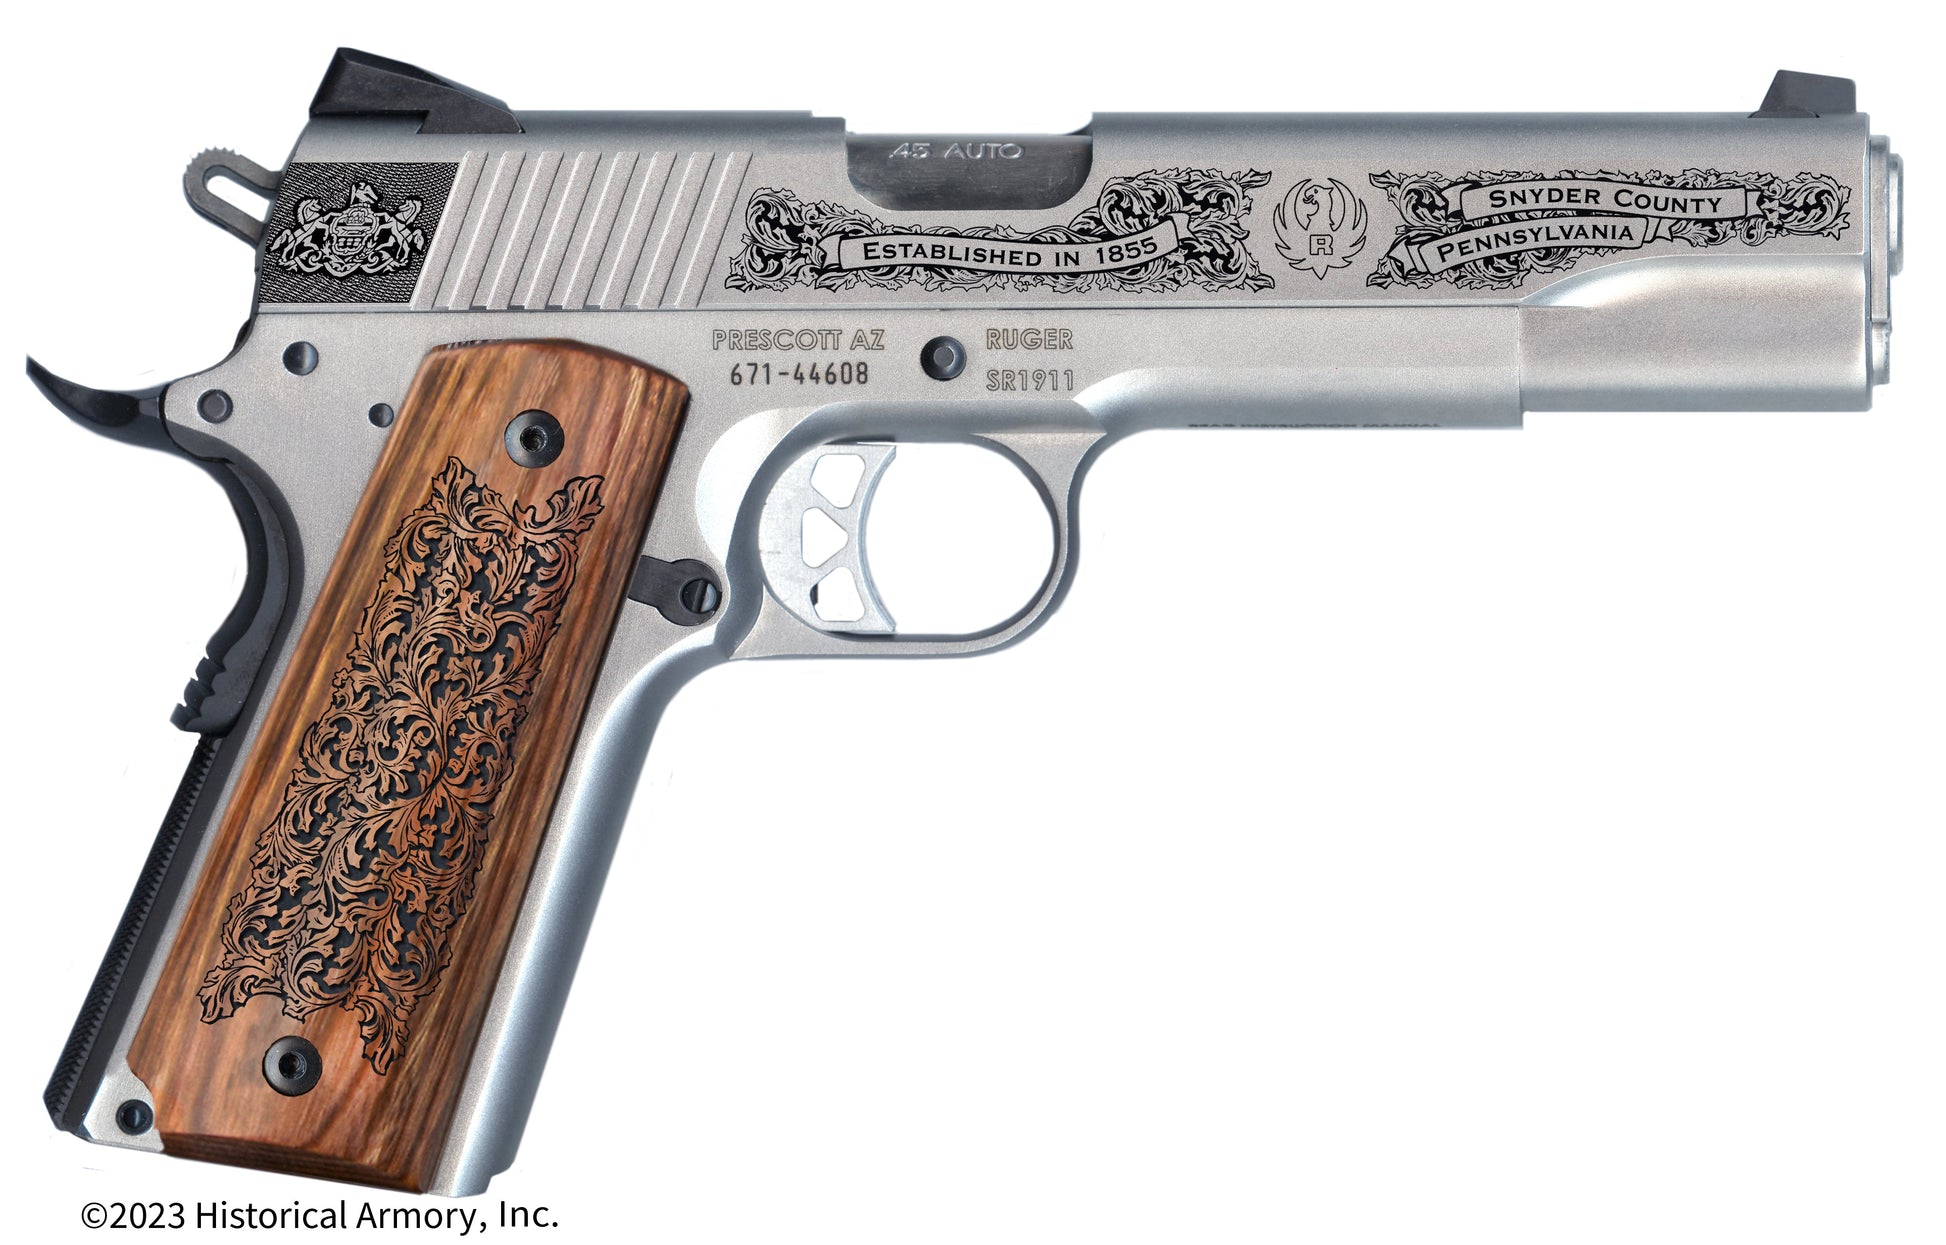 Snyder County Pennsylvania Engraved .45 Auto Ruger 1911